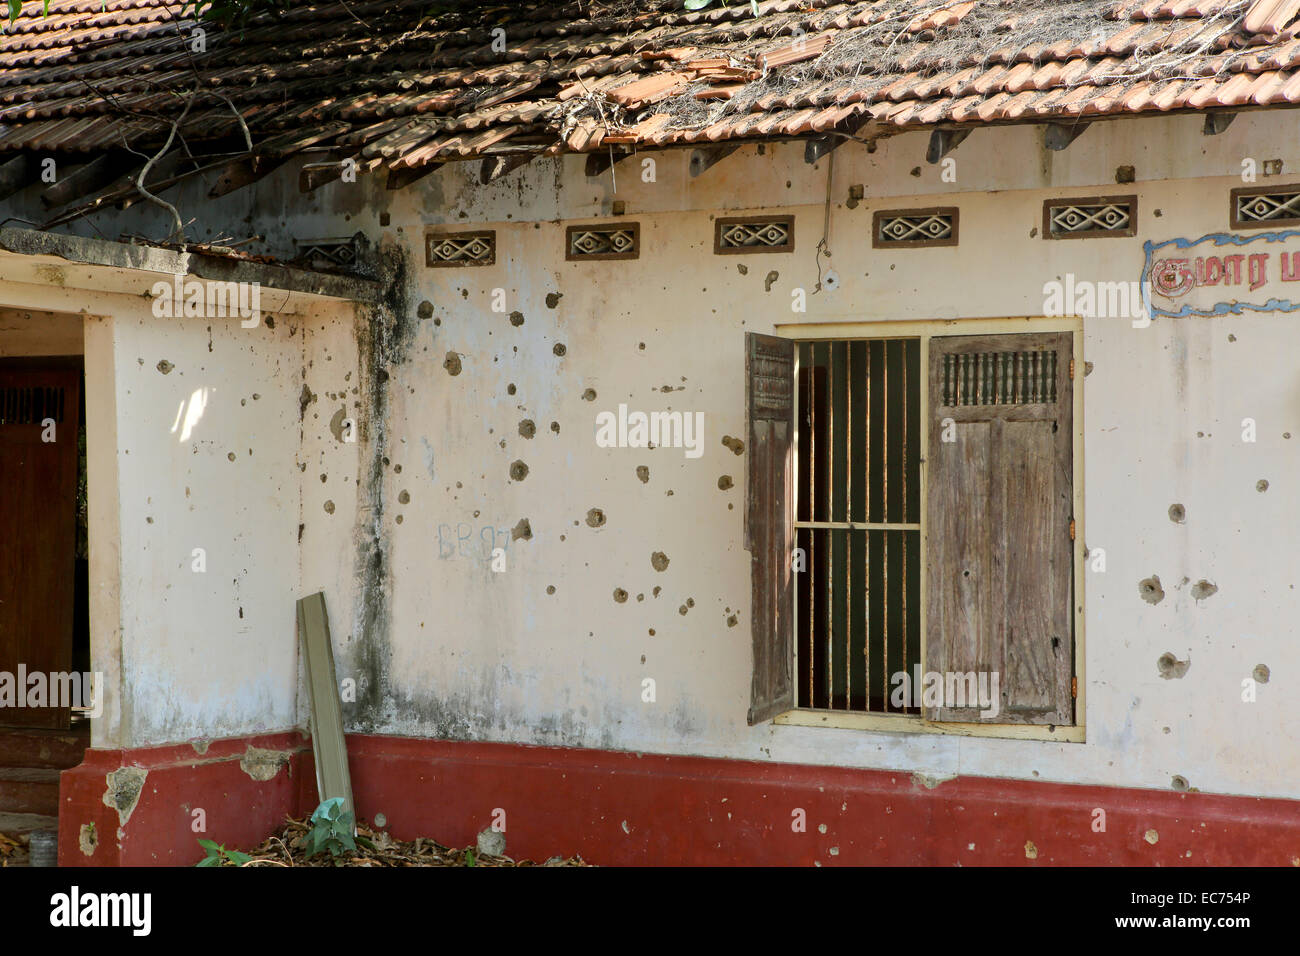 Abandoned house full of holes from machine gun fire from the civil war in Jaffna, Sri Lanka Stock Photo